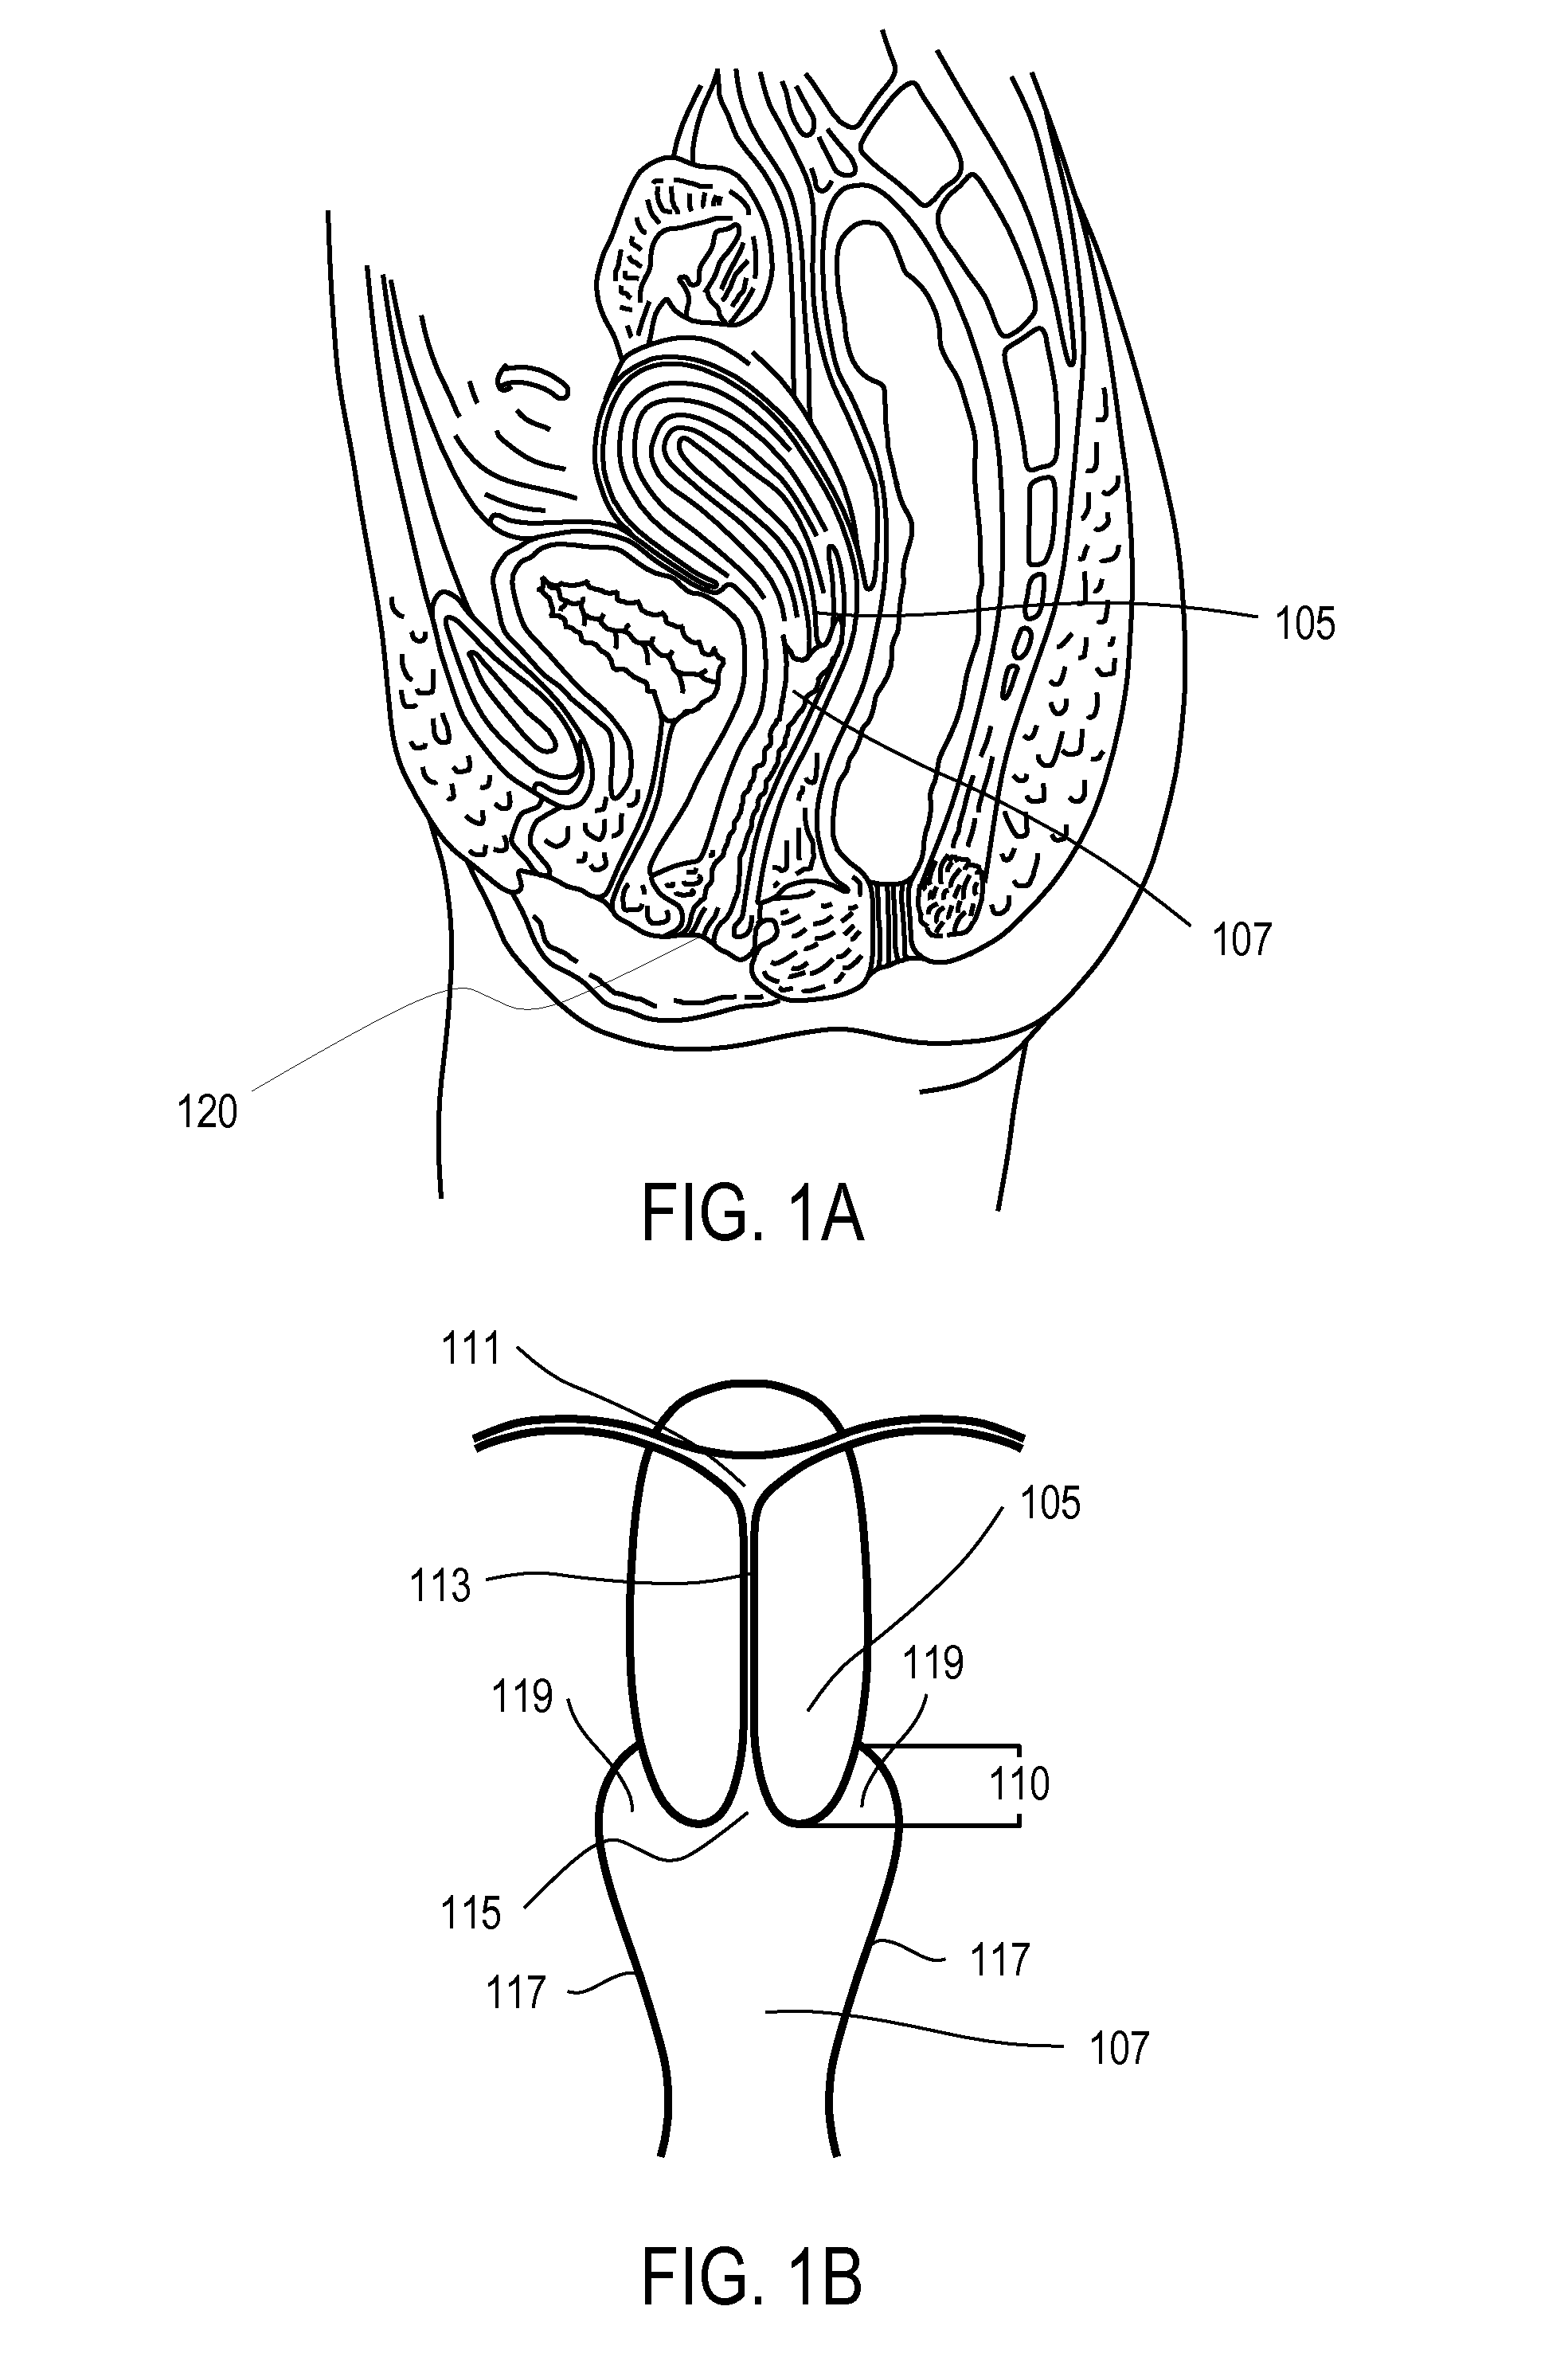 Therapeutic intra-vaginal devices and methods